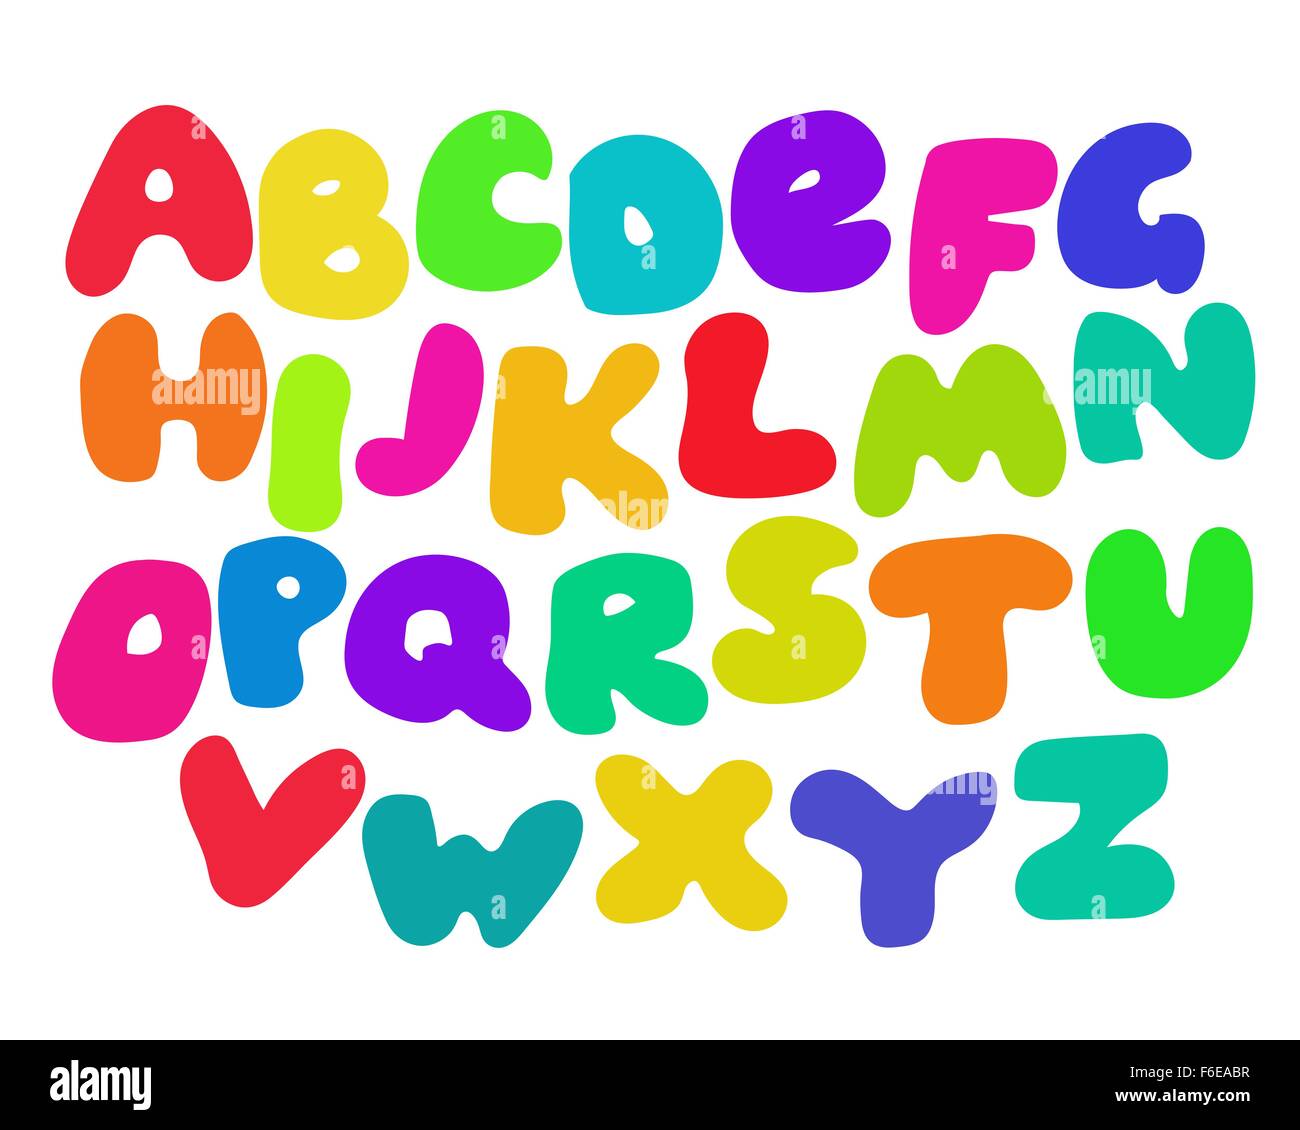 Funny Colorful Alphabet Stock Vector